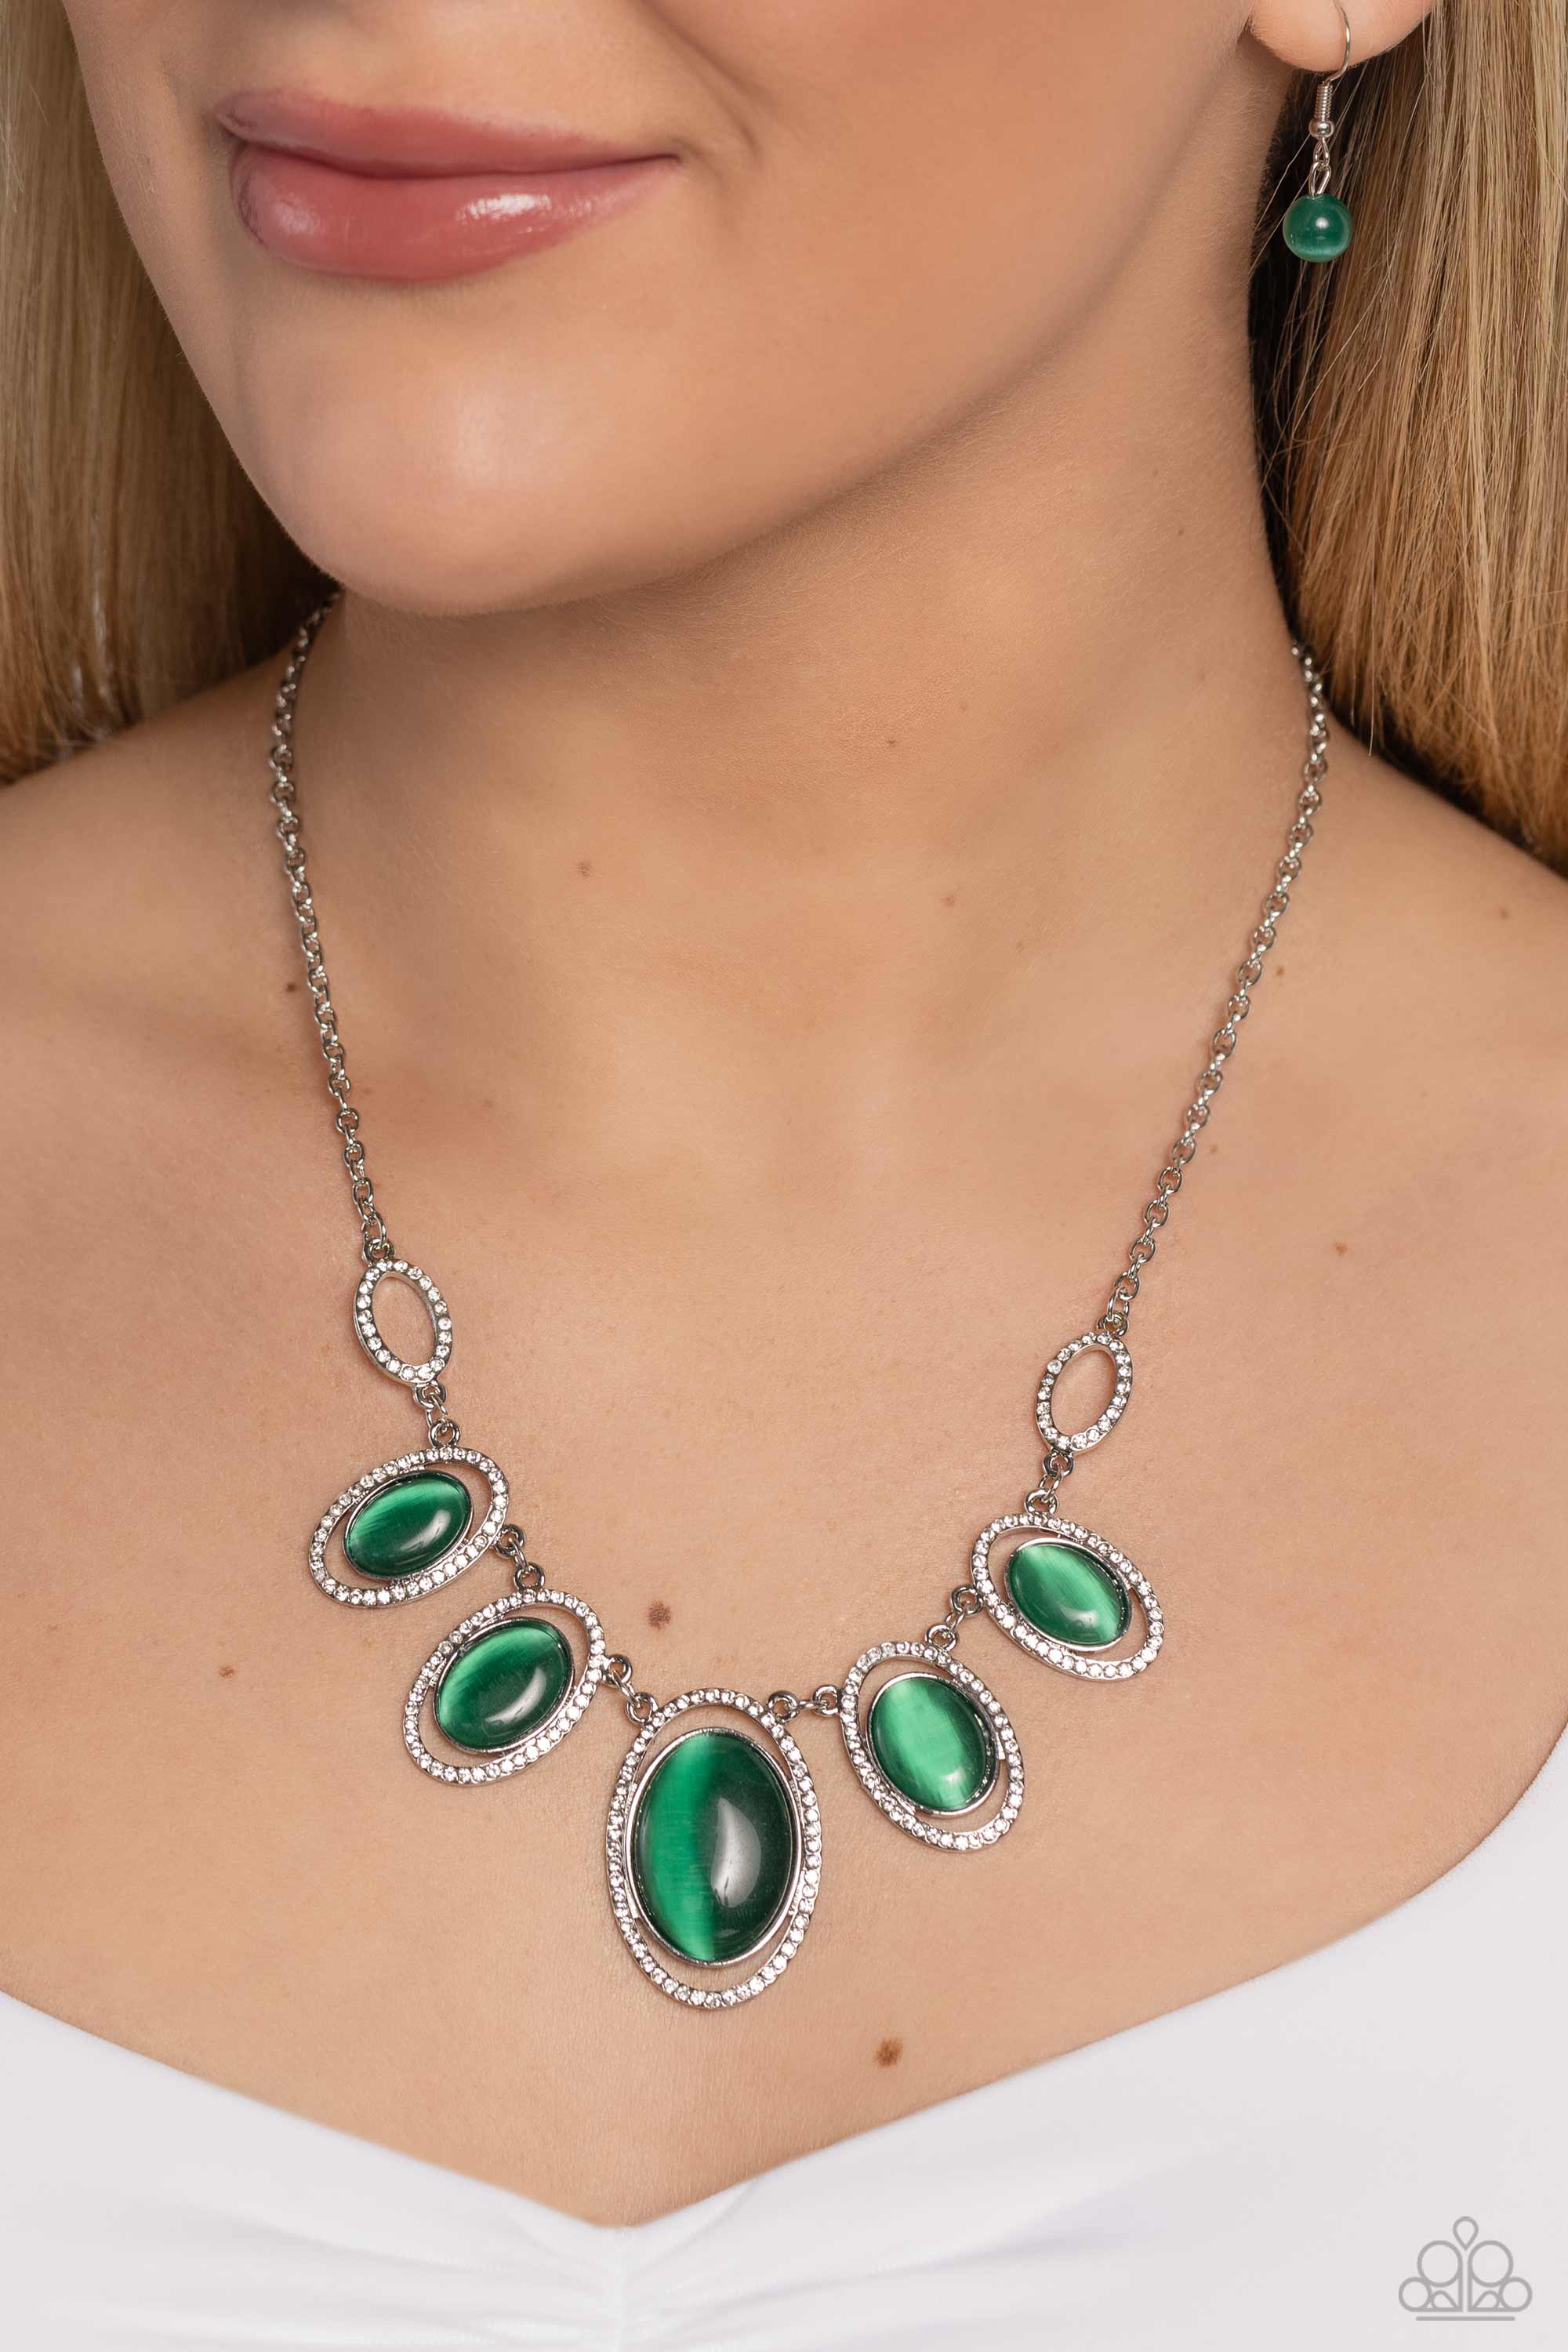 A BEAM Come True Green Cat's Eye Stone Necklace - Paparazzi Accessories- lightbox - CarasShop.com - $5 Jewelry by Cara Jewels